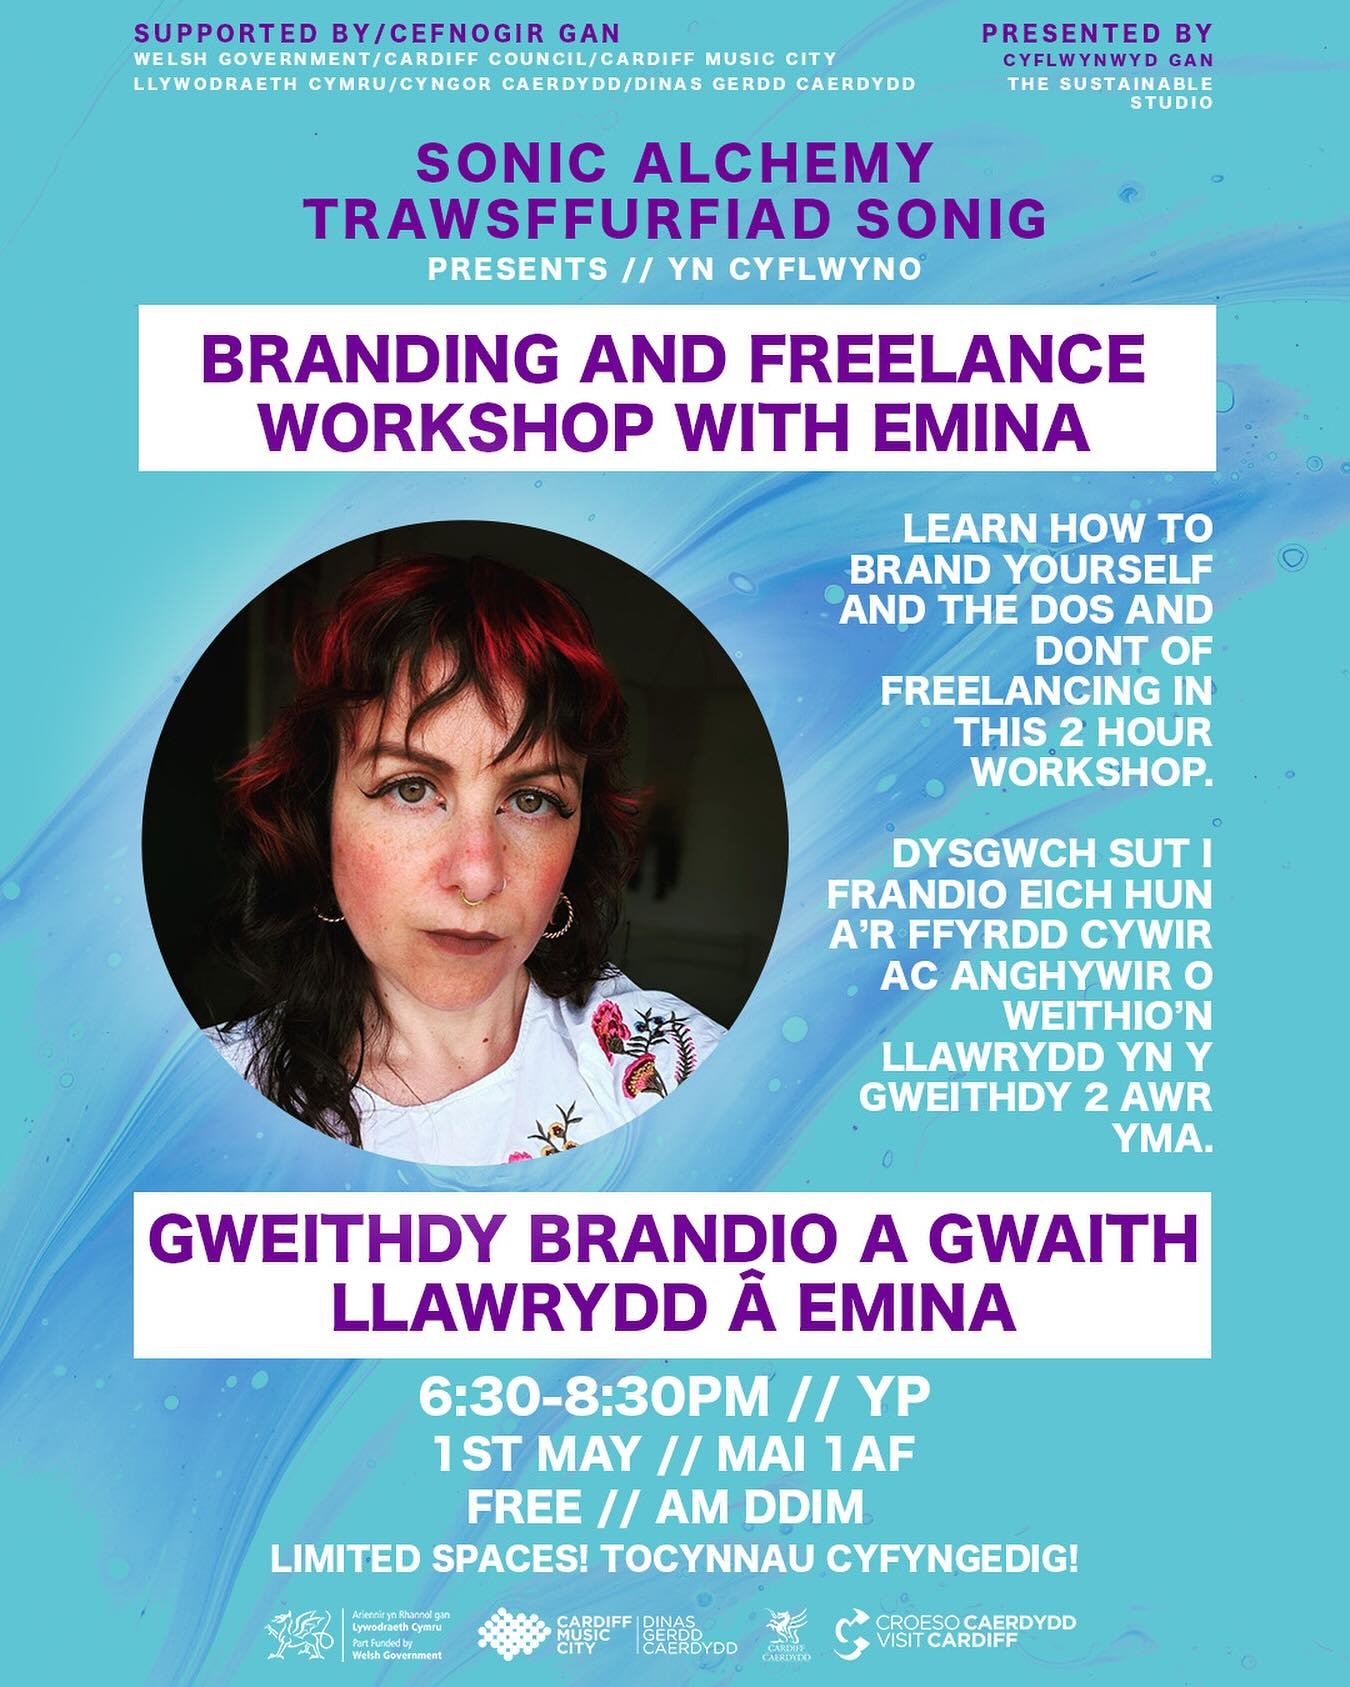 Being a freelancer and getting yourself out there is tough! This FREE workshop will take your through some useful steps to brand yourself either as an individual or business and how to negotiate the world of freelancing. Emina is a brand strategist a